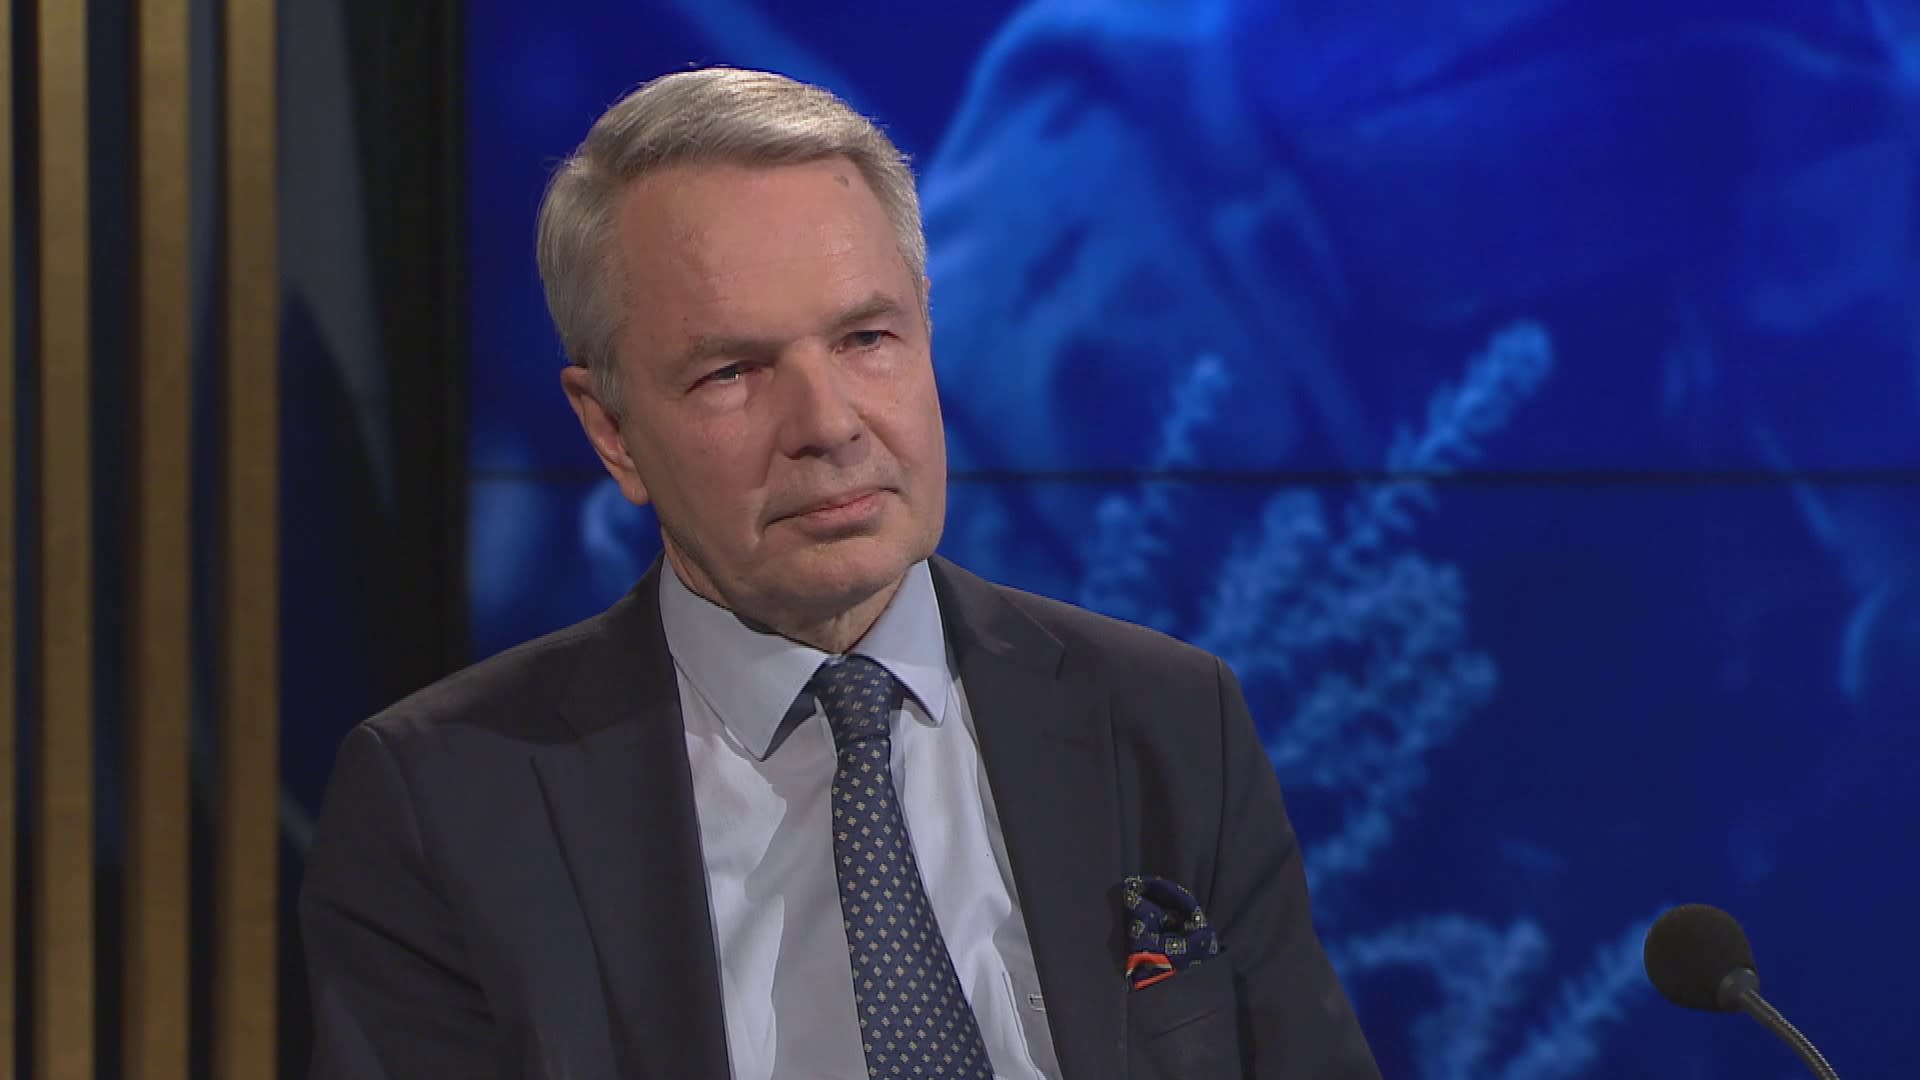 Haavisto: Widespread frustration with the delay in the accession of Finland and Sweden to NATO